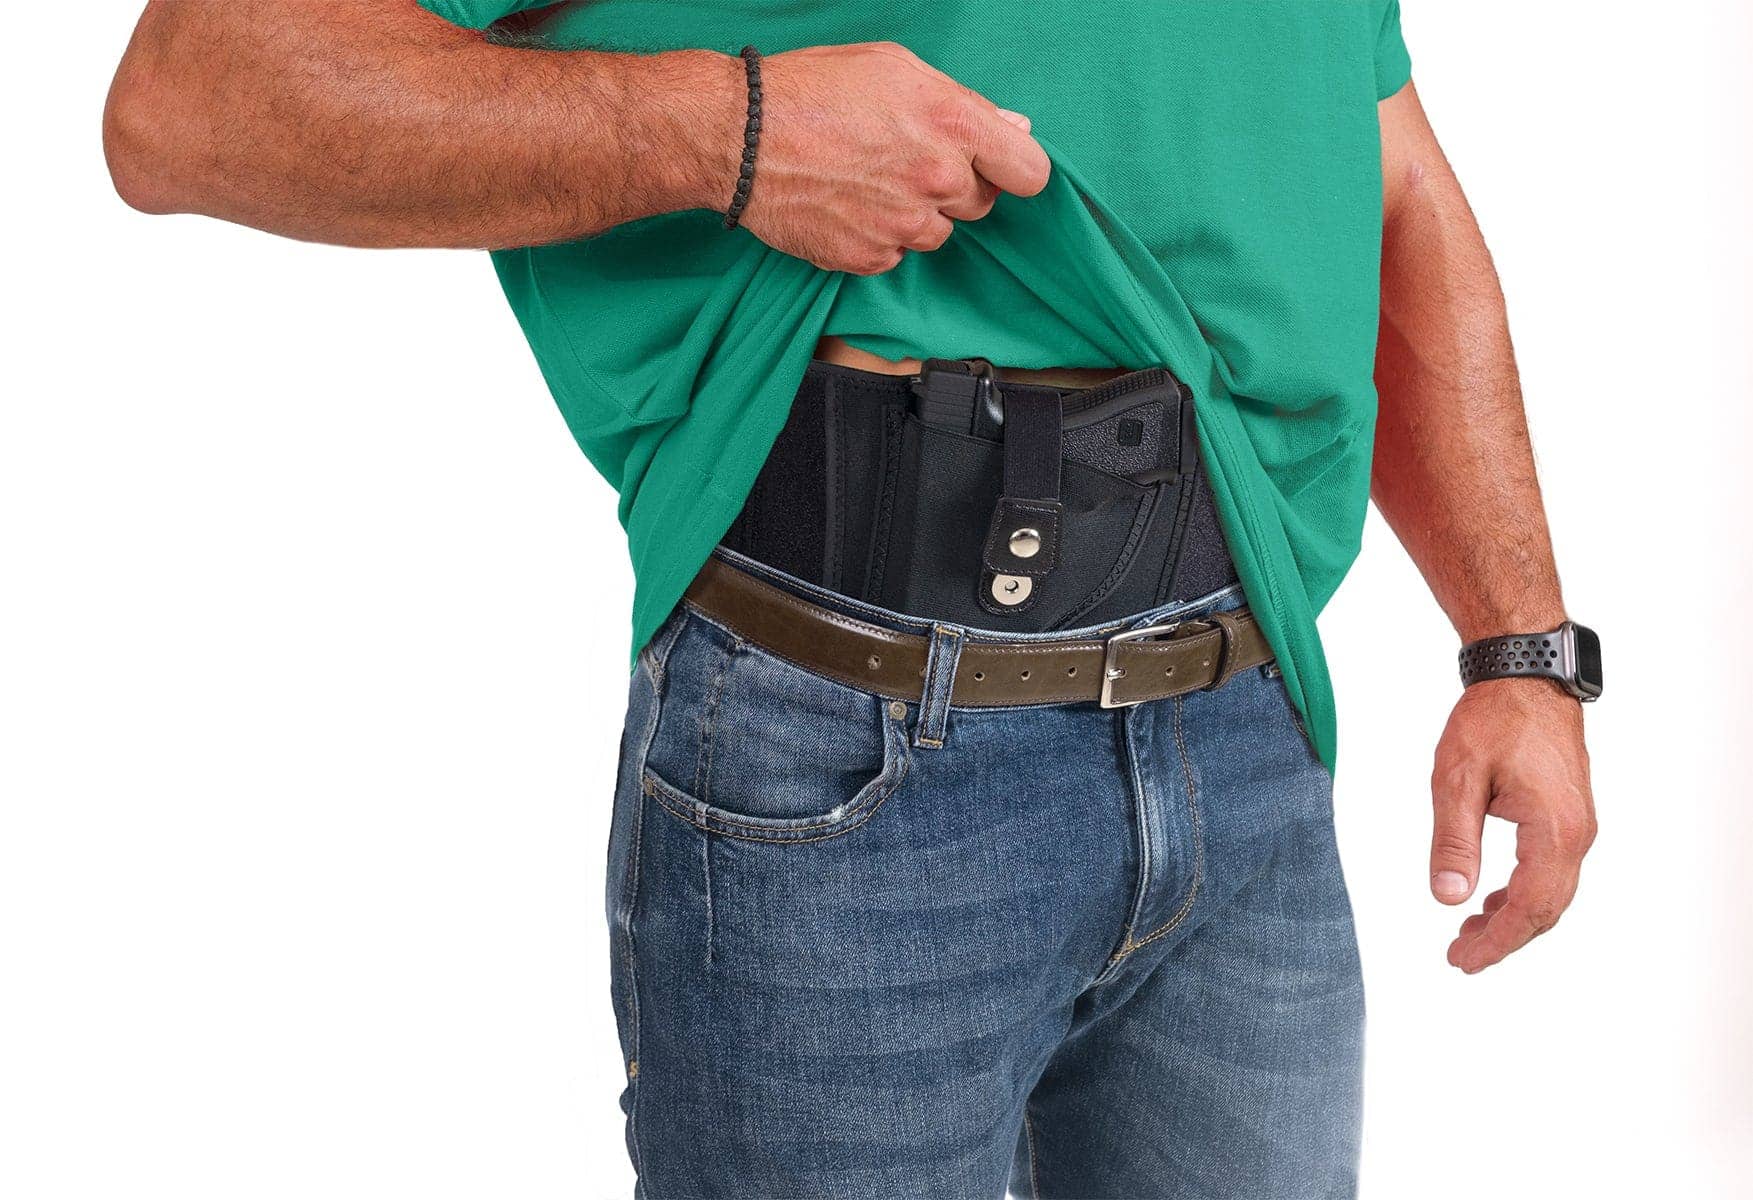  We The People Holsters - Premium Universal Belly Band